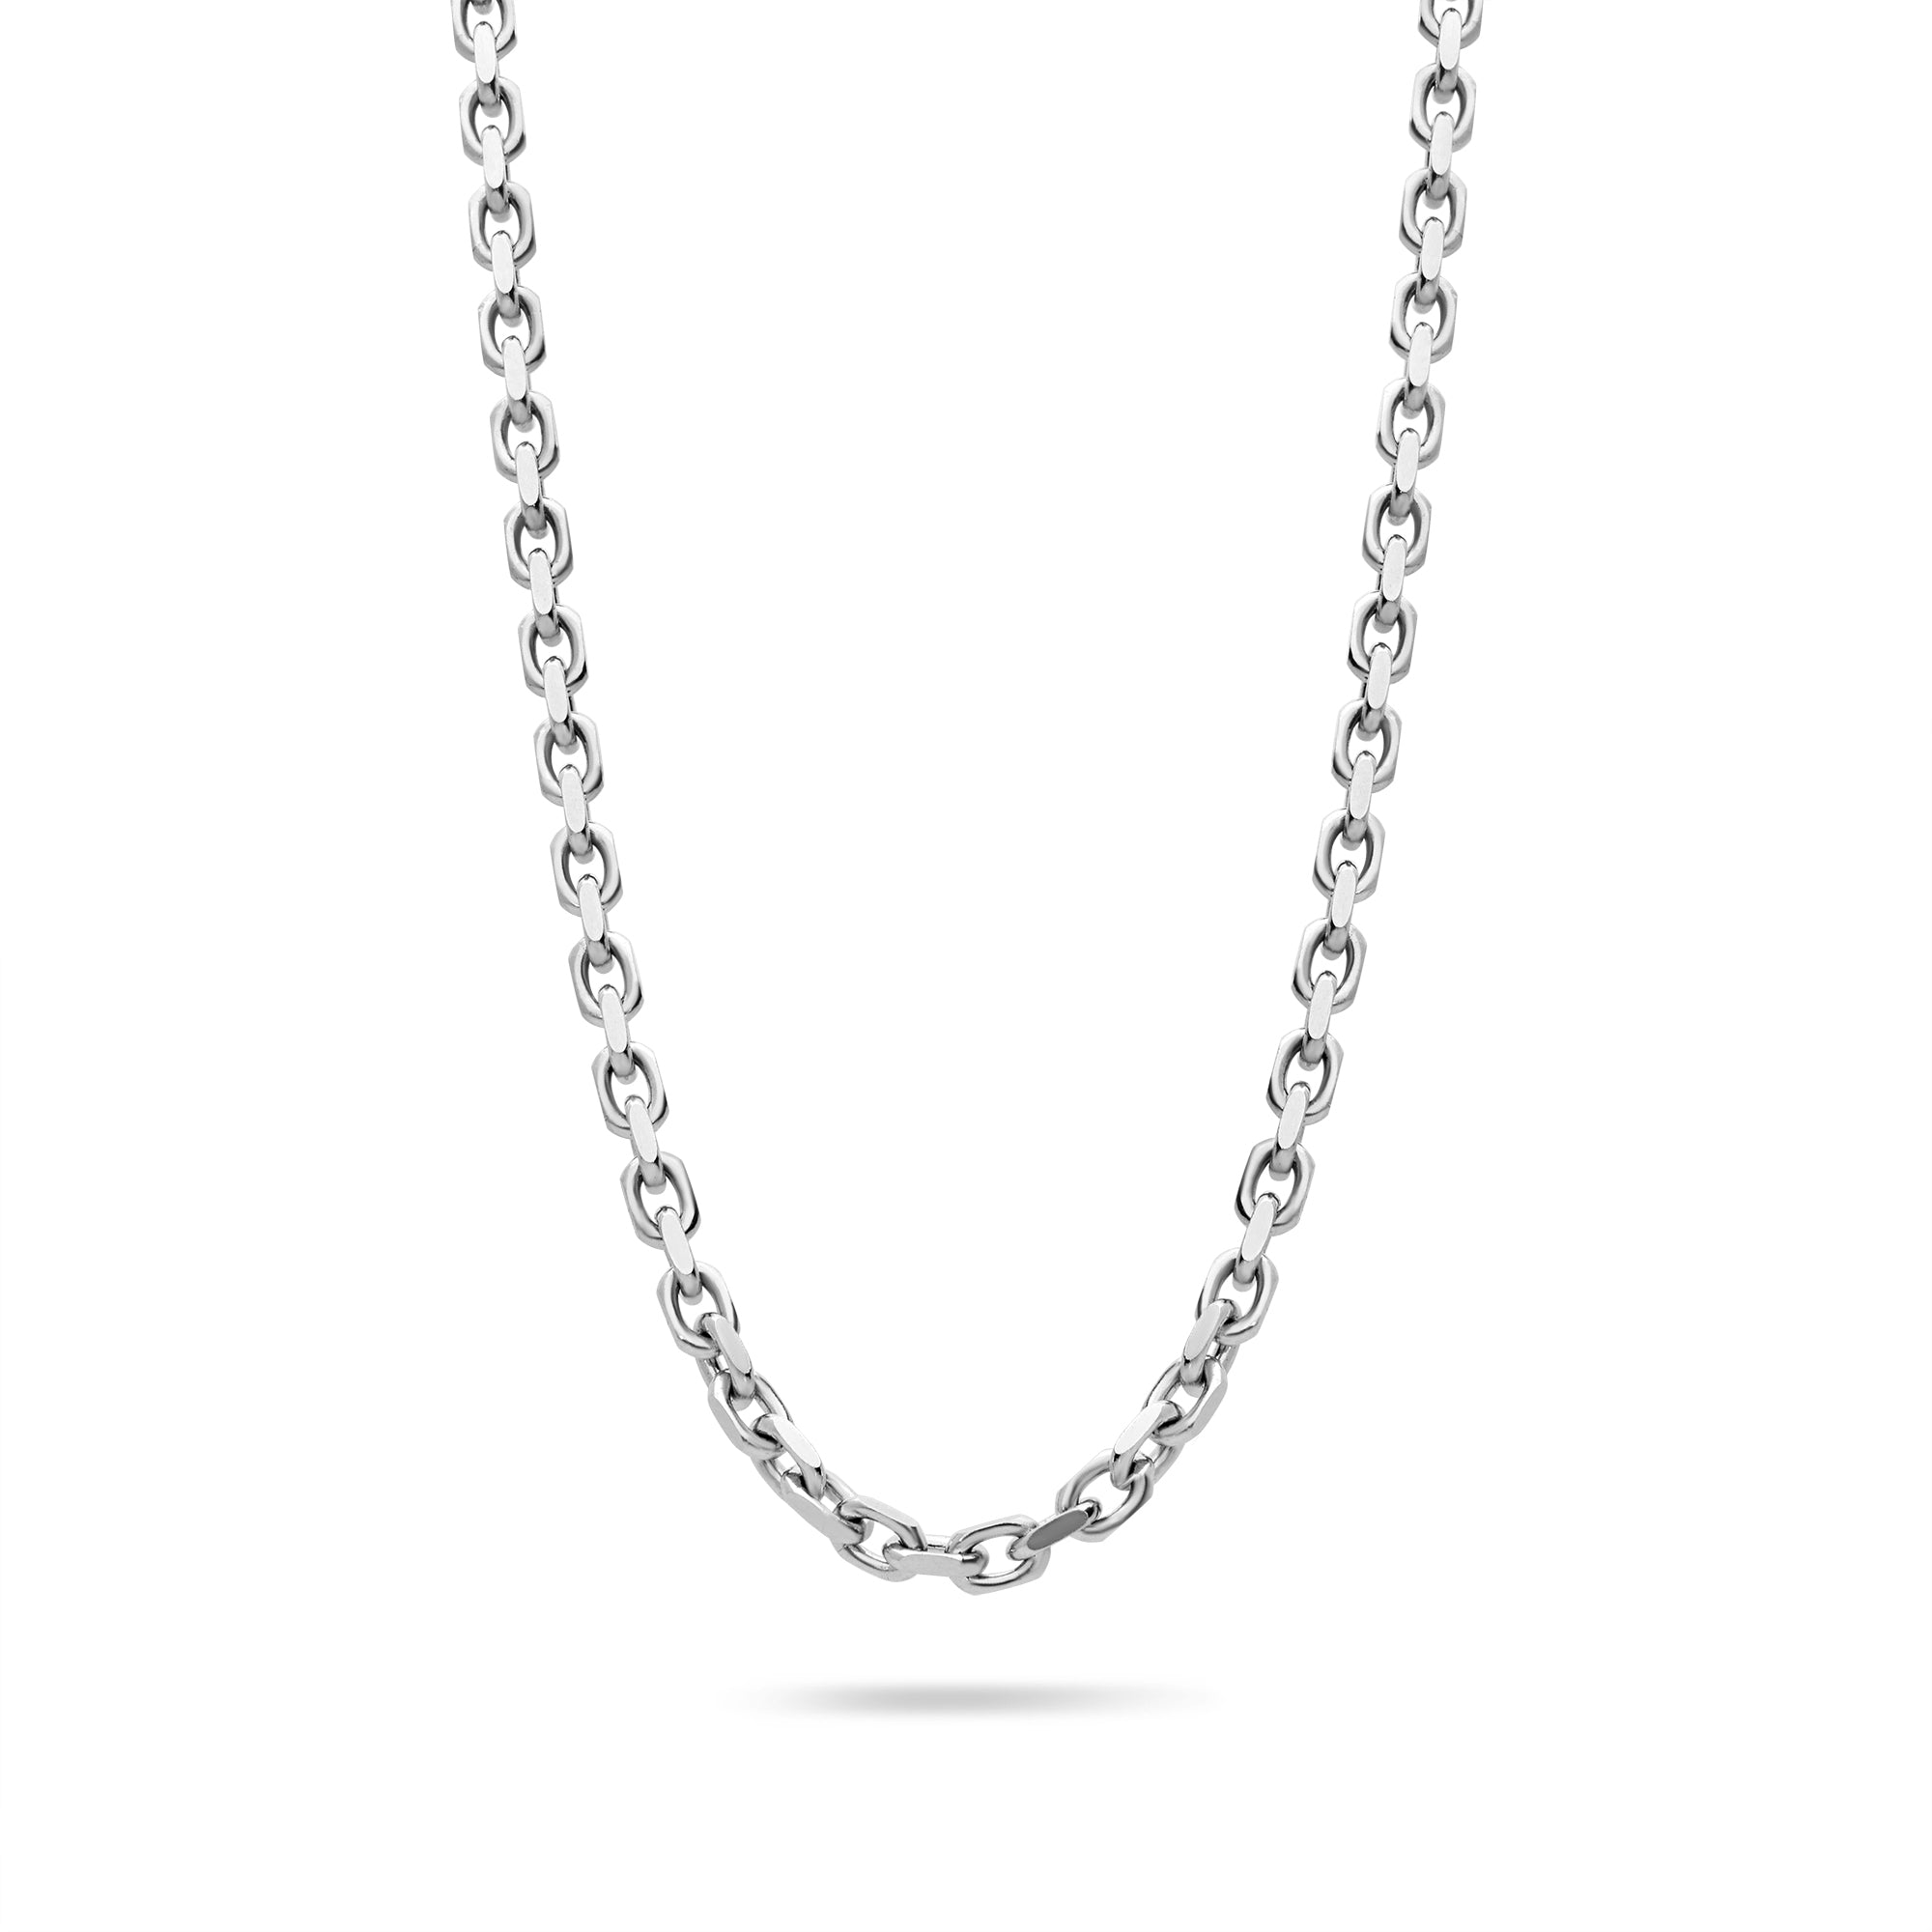 Gold Odin Link Chain (4mm) - If & Co. 18K White Gold / 24 inch